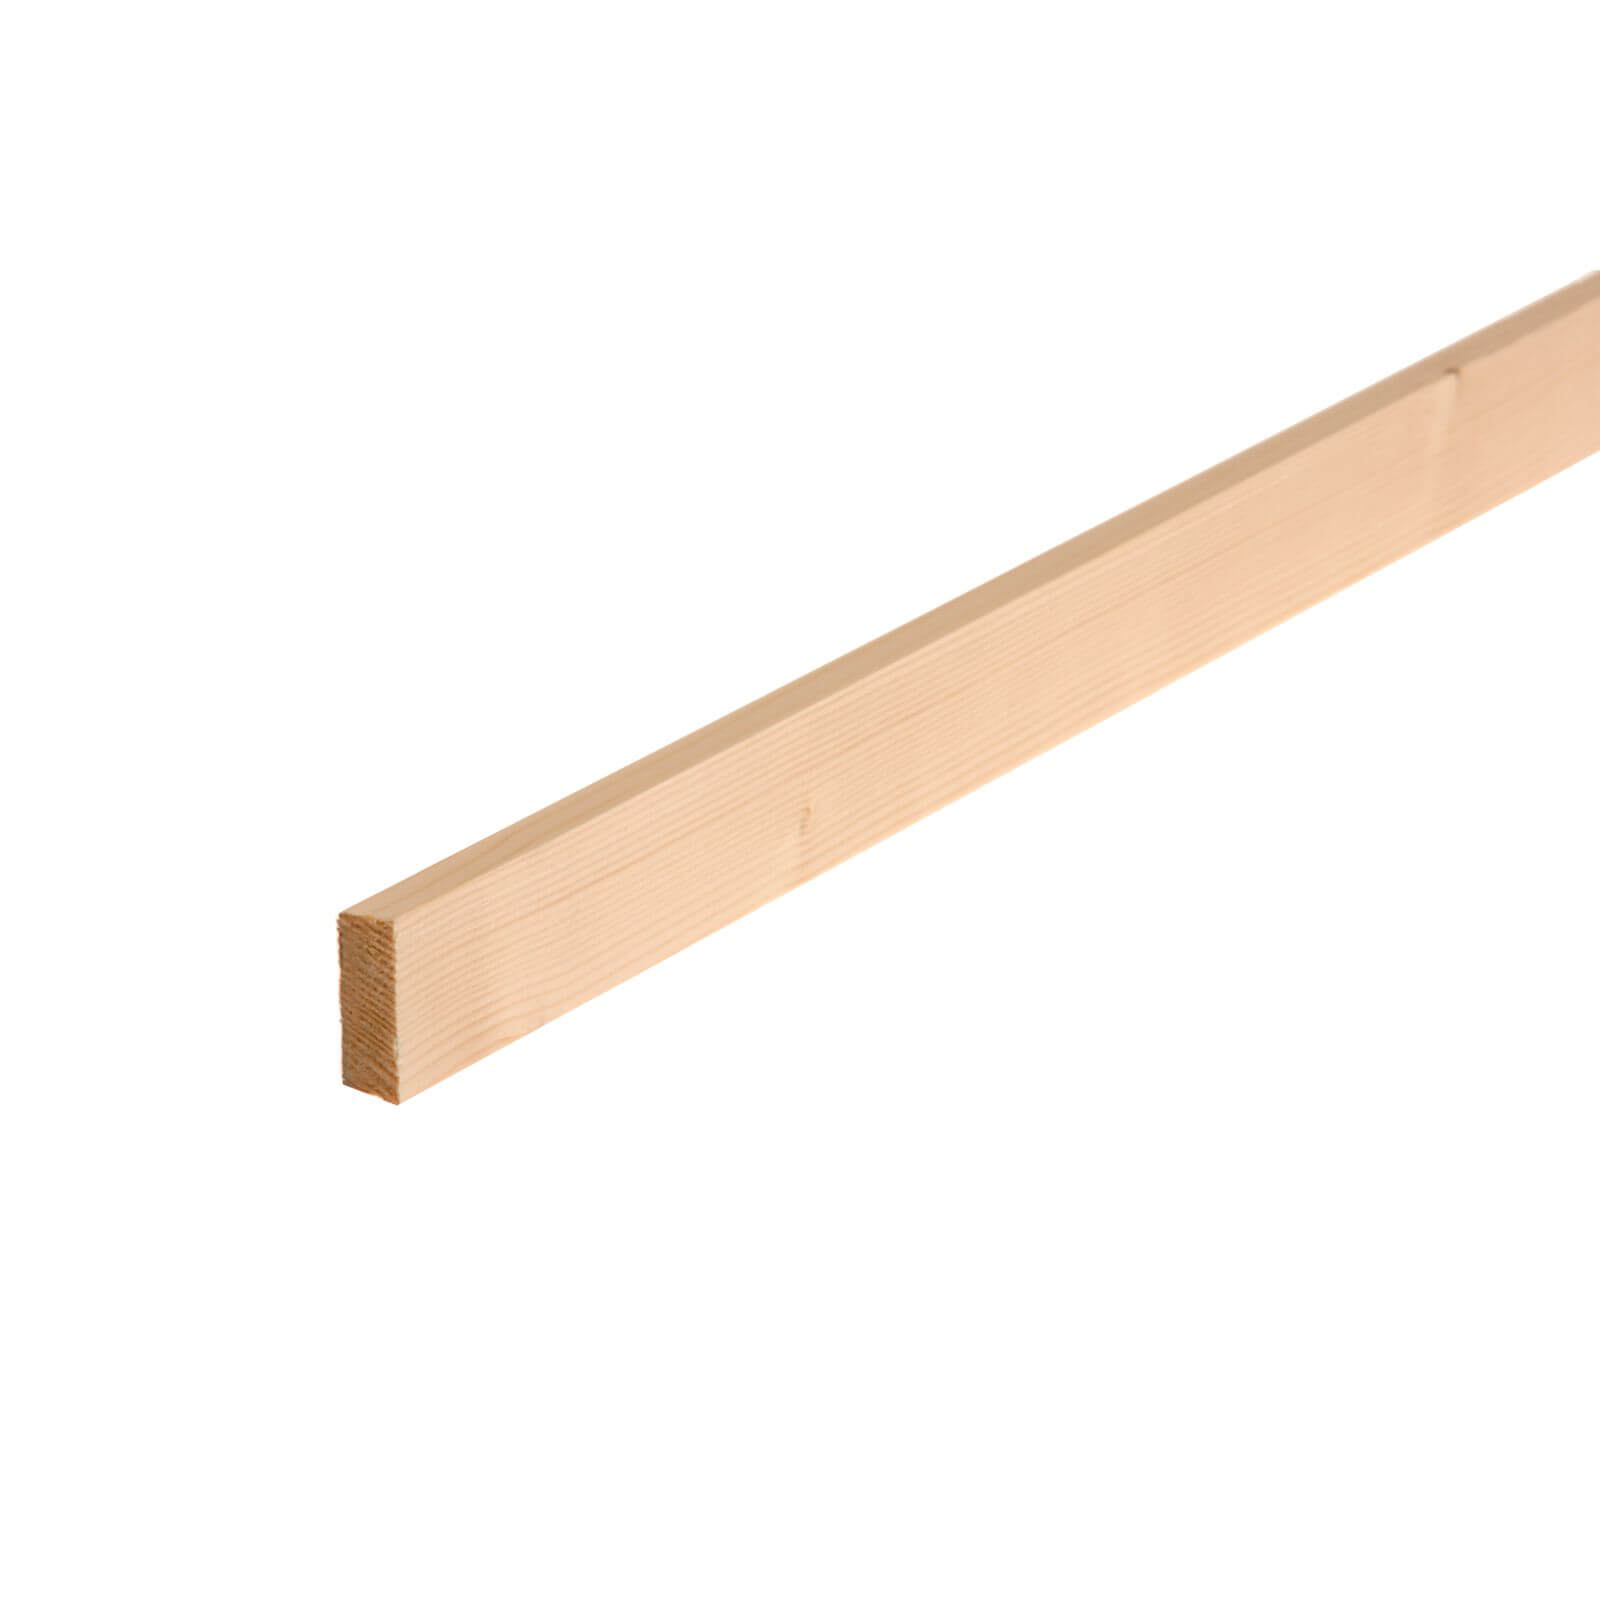 Photo of Metsa Planed Square Edge Stick Softwood Timber 2.1m -16mm X 38mm X 2100mm-